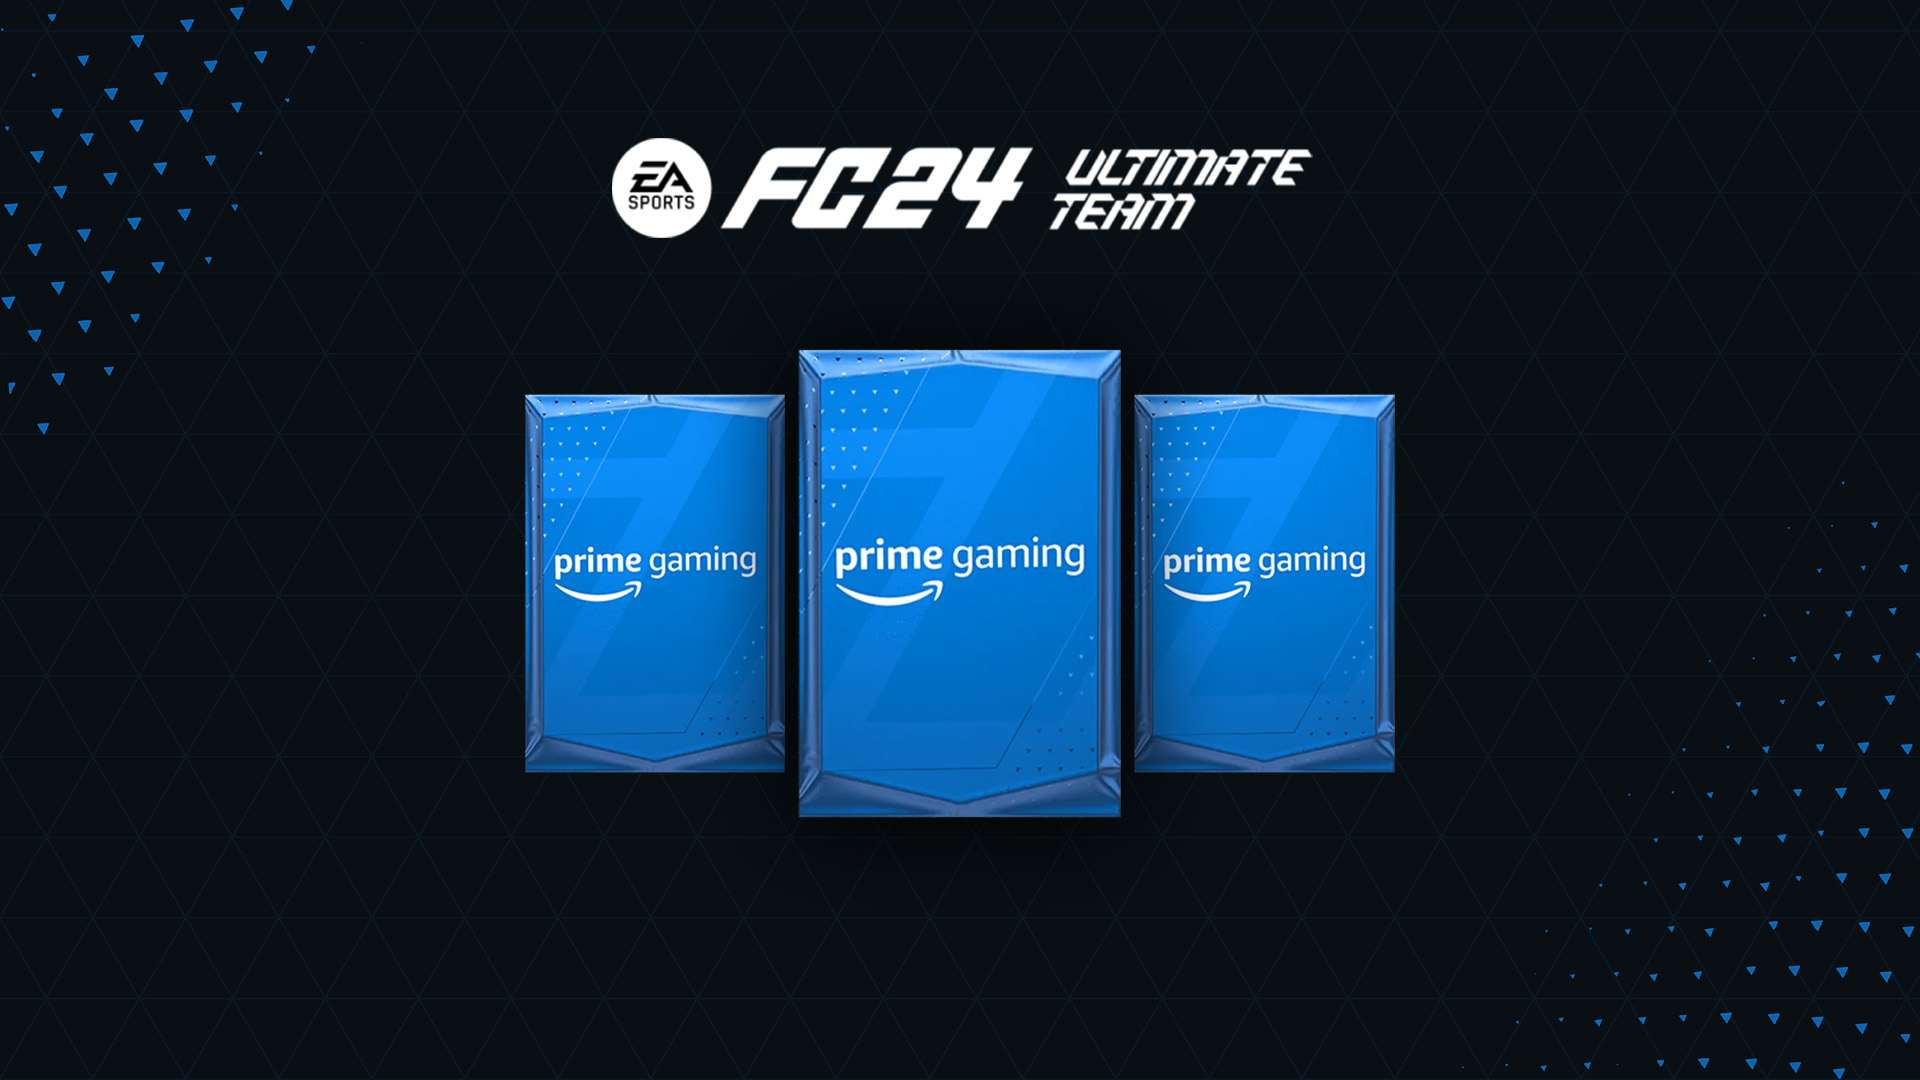 FREE EAFC 24 PRIME GAMING PACK, bit late to the party but theres peopl